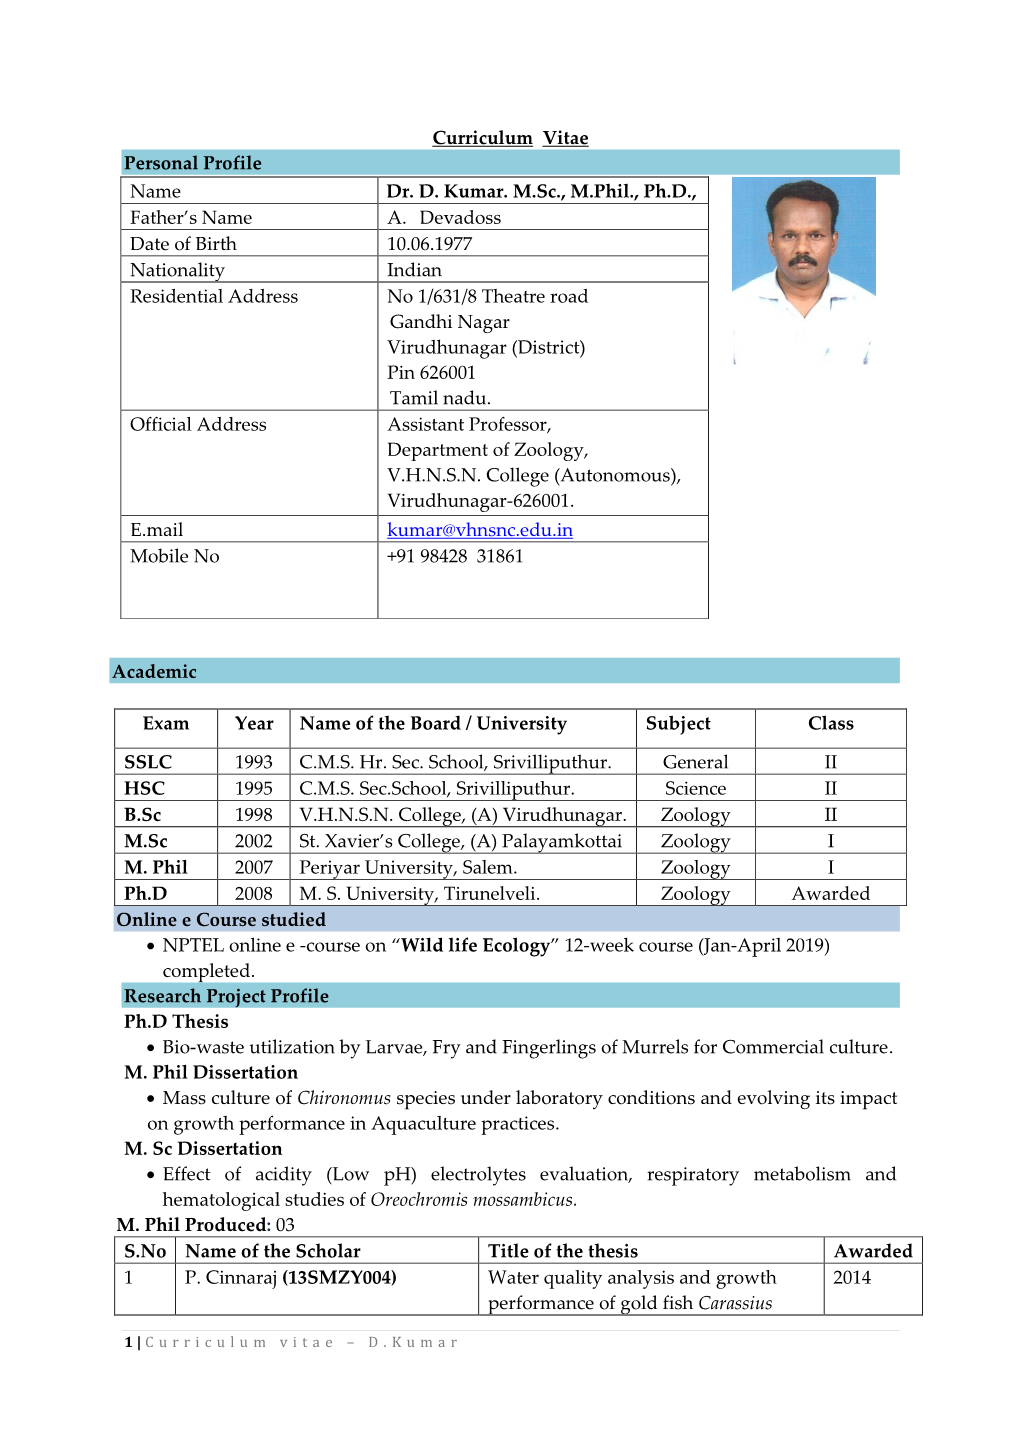 Curriculum Vitae Personal Profile Academic Exam Year Name of the Board / University Subject Class SSLC 1993 C.M.S. Hr. S